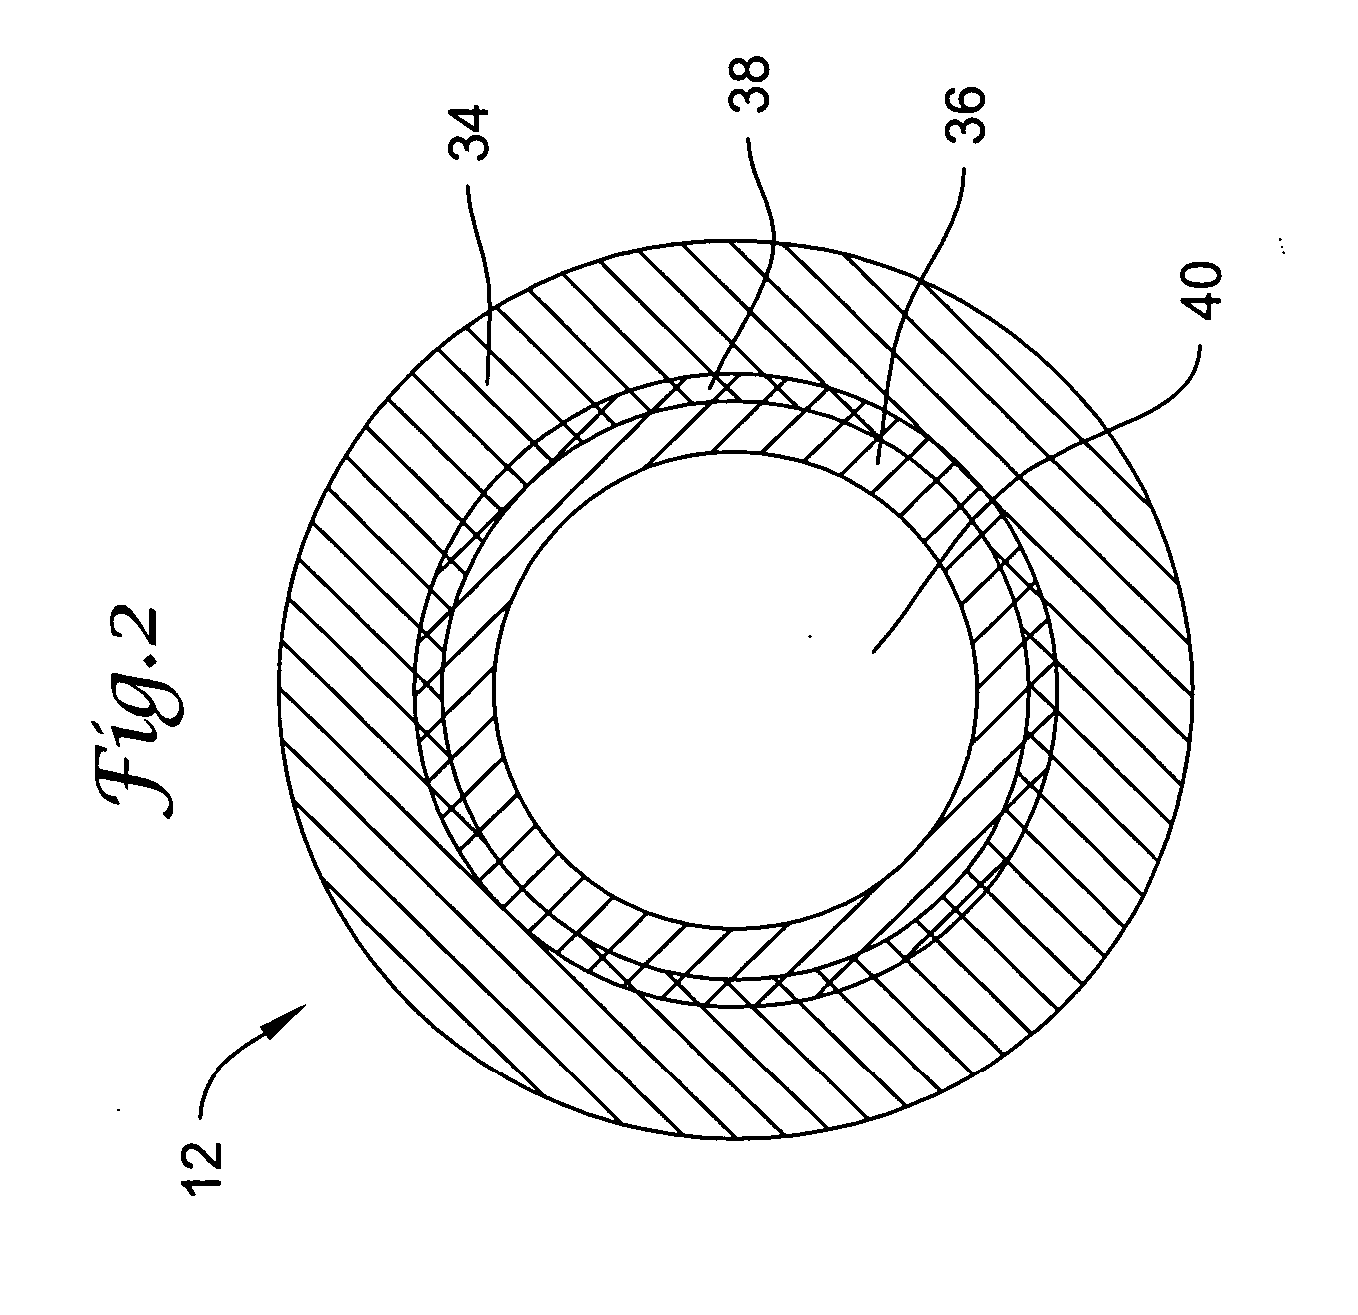 Medical device incorporating a polymer blend